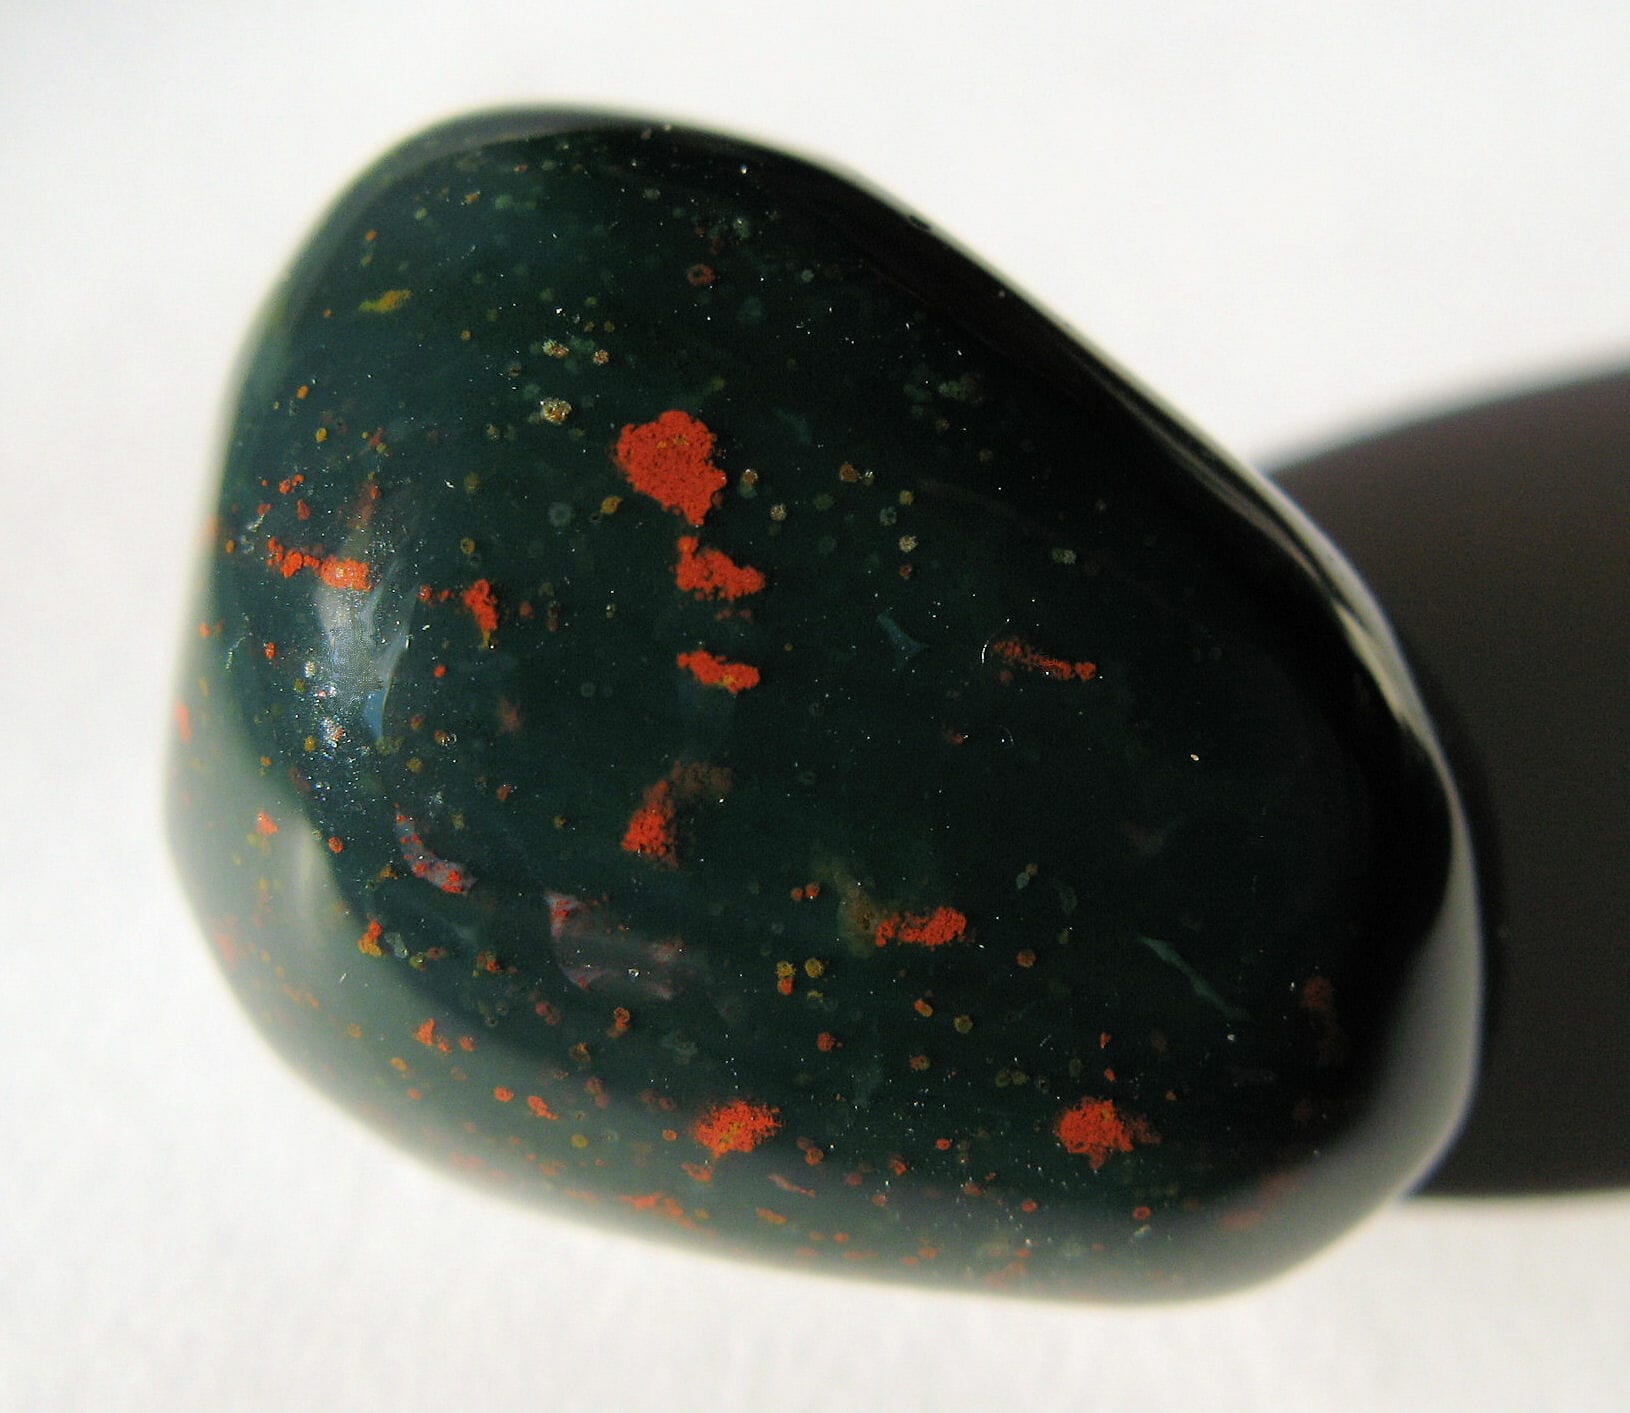 Bloodstone strengthens the mind and eliminates negativity aiding in root chakra balance